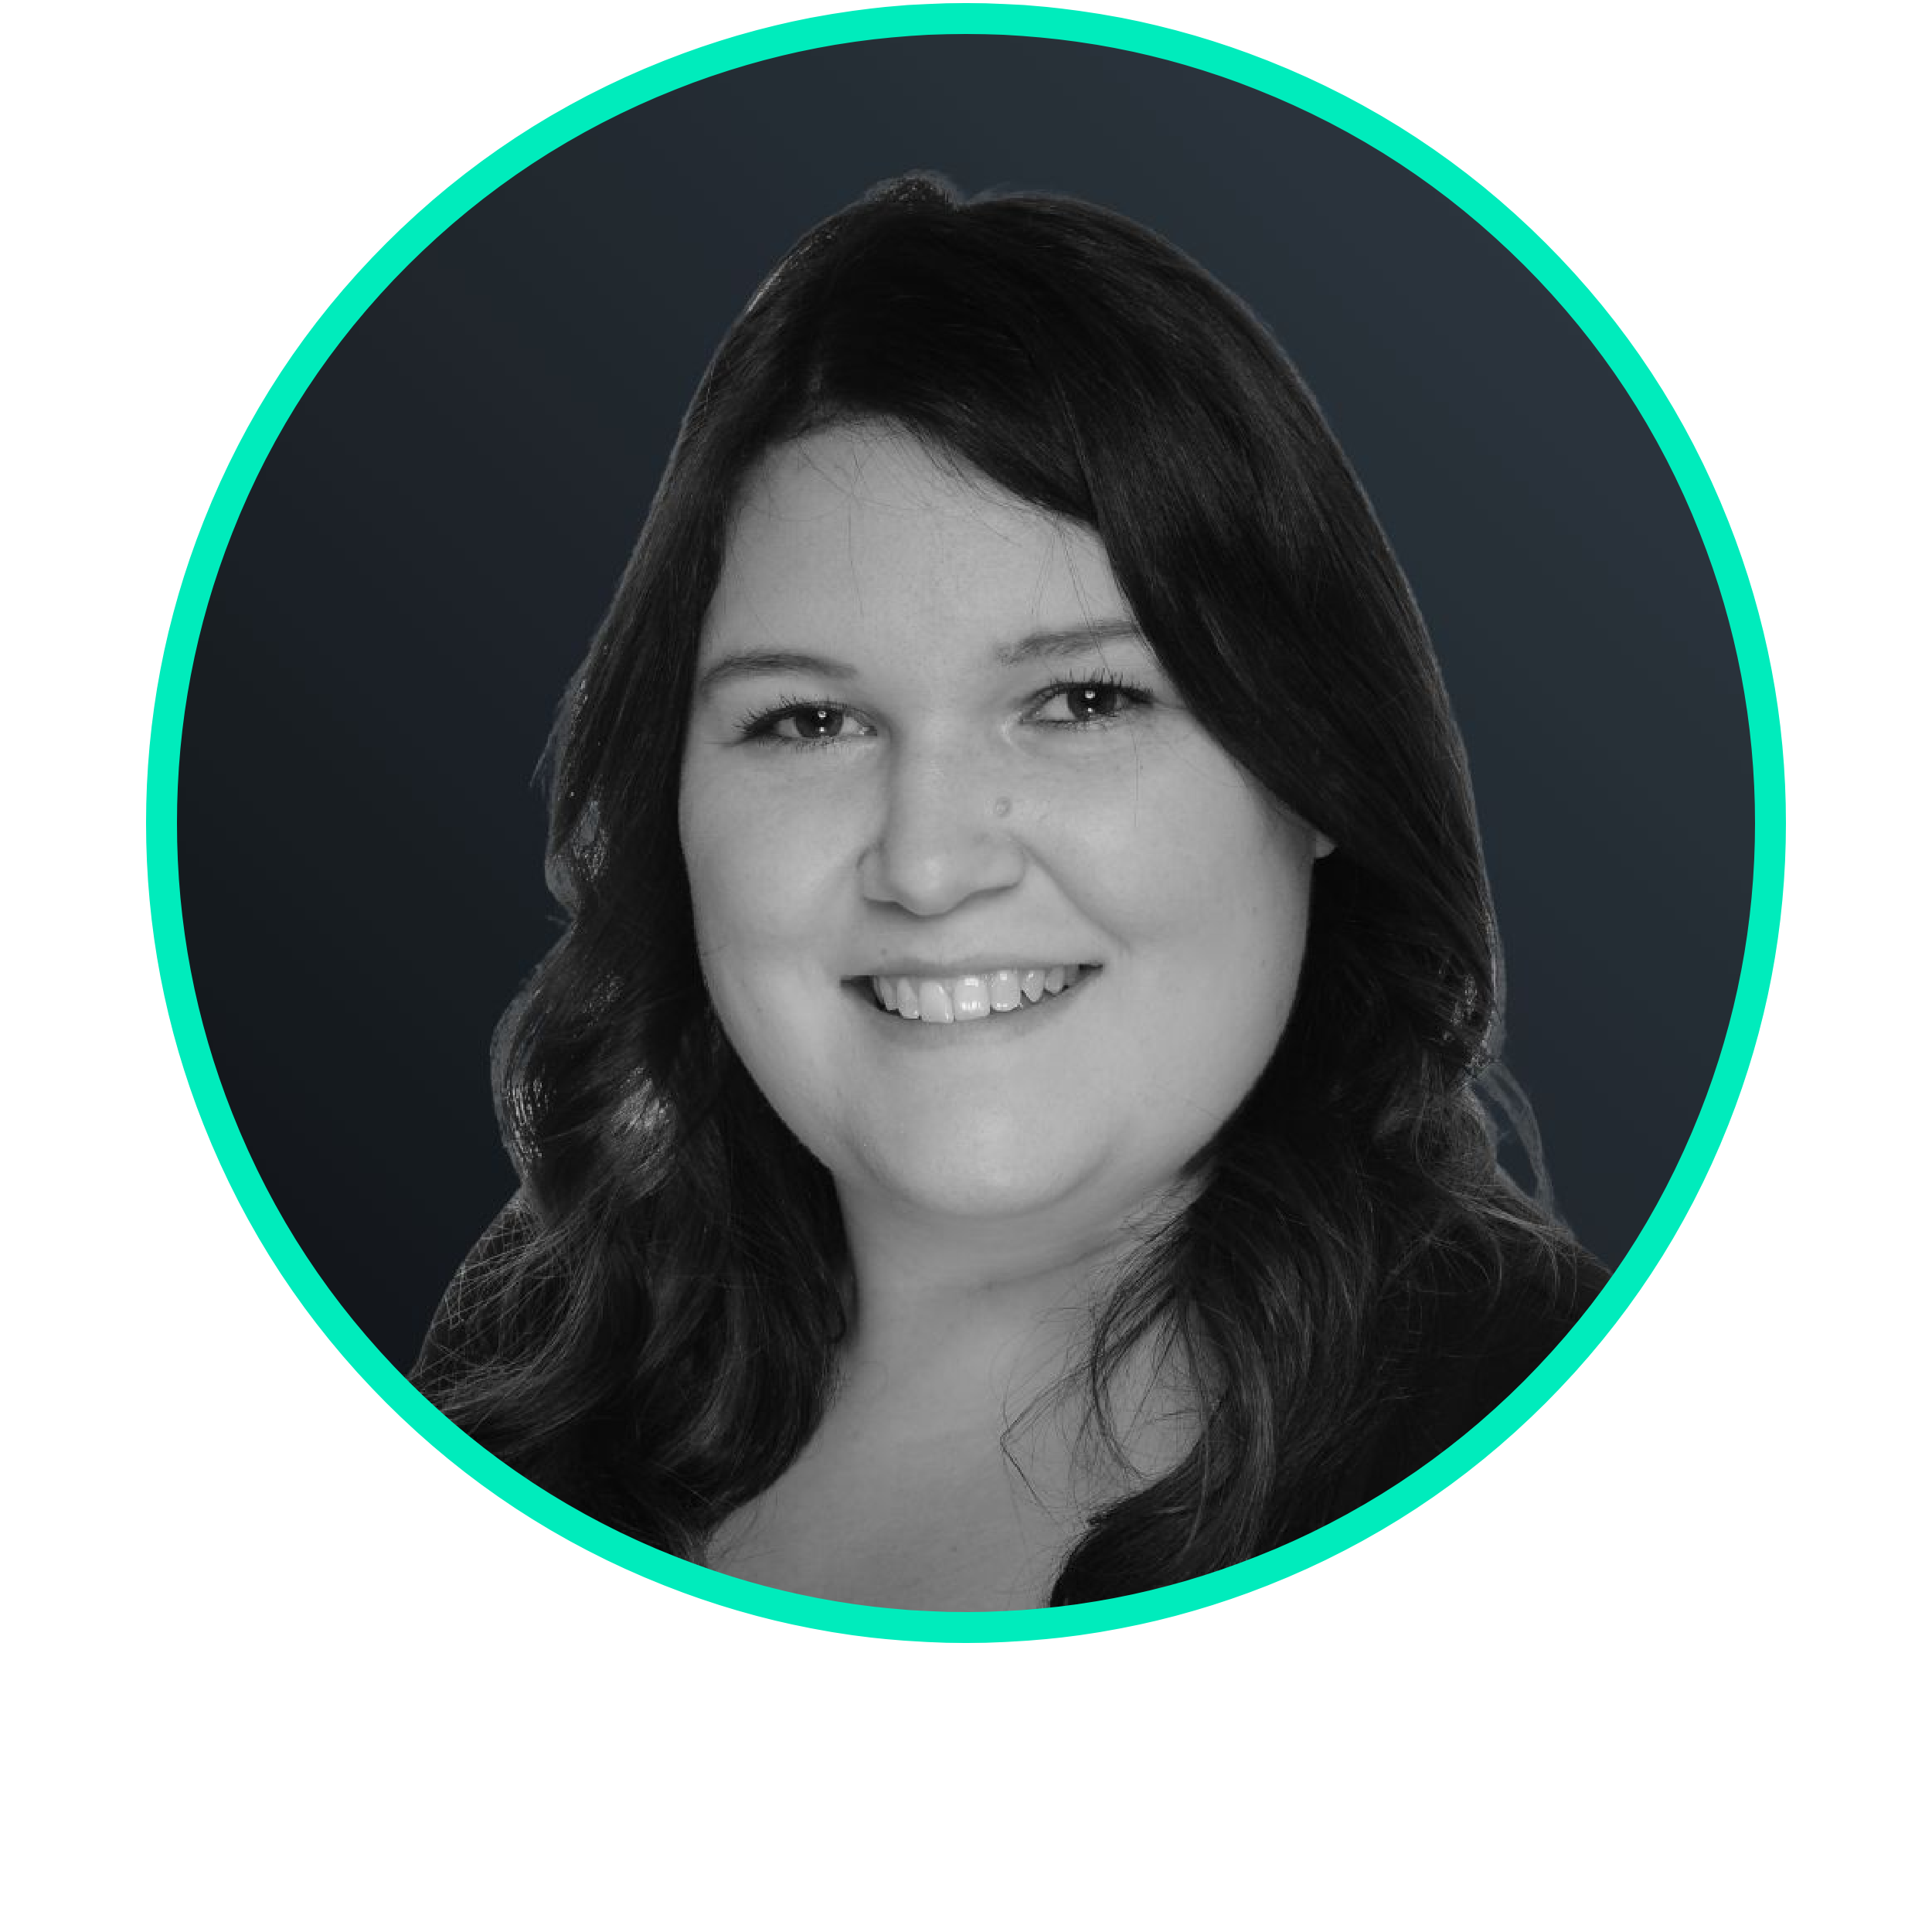 Jessica Wolf Consultant bei d.velop